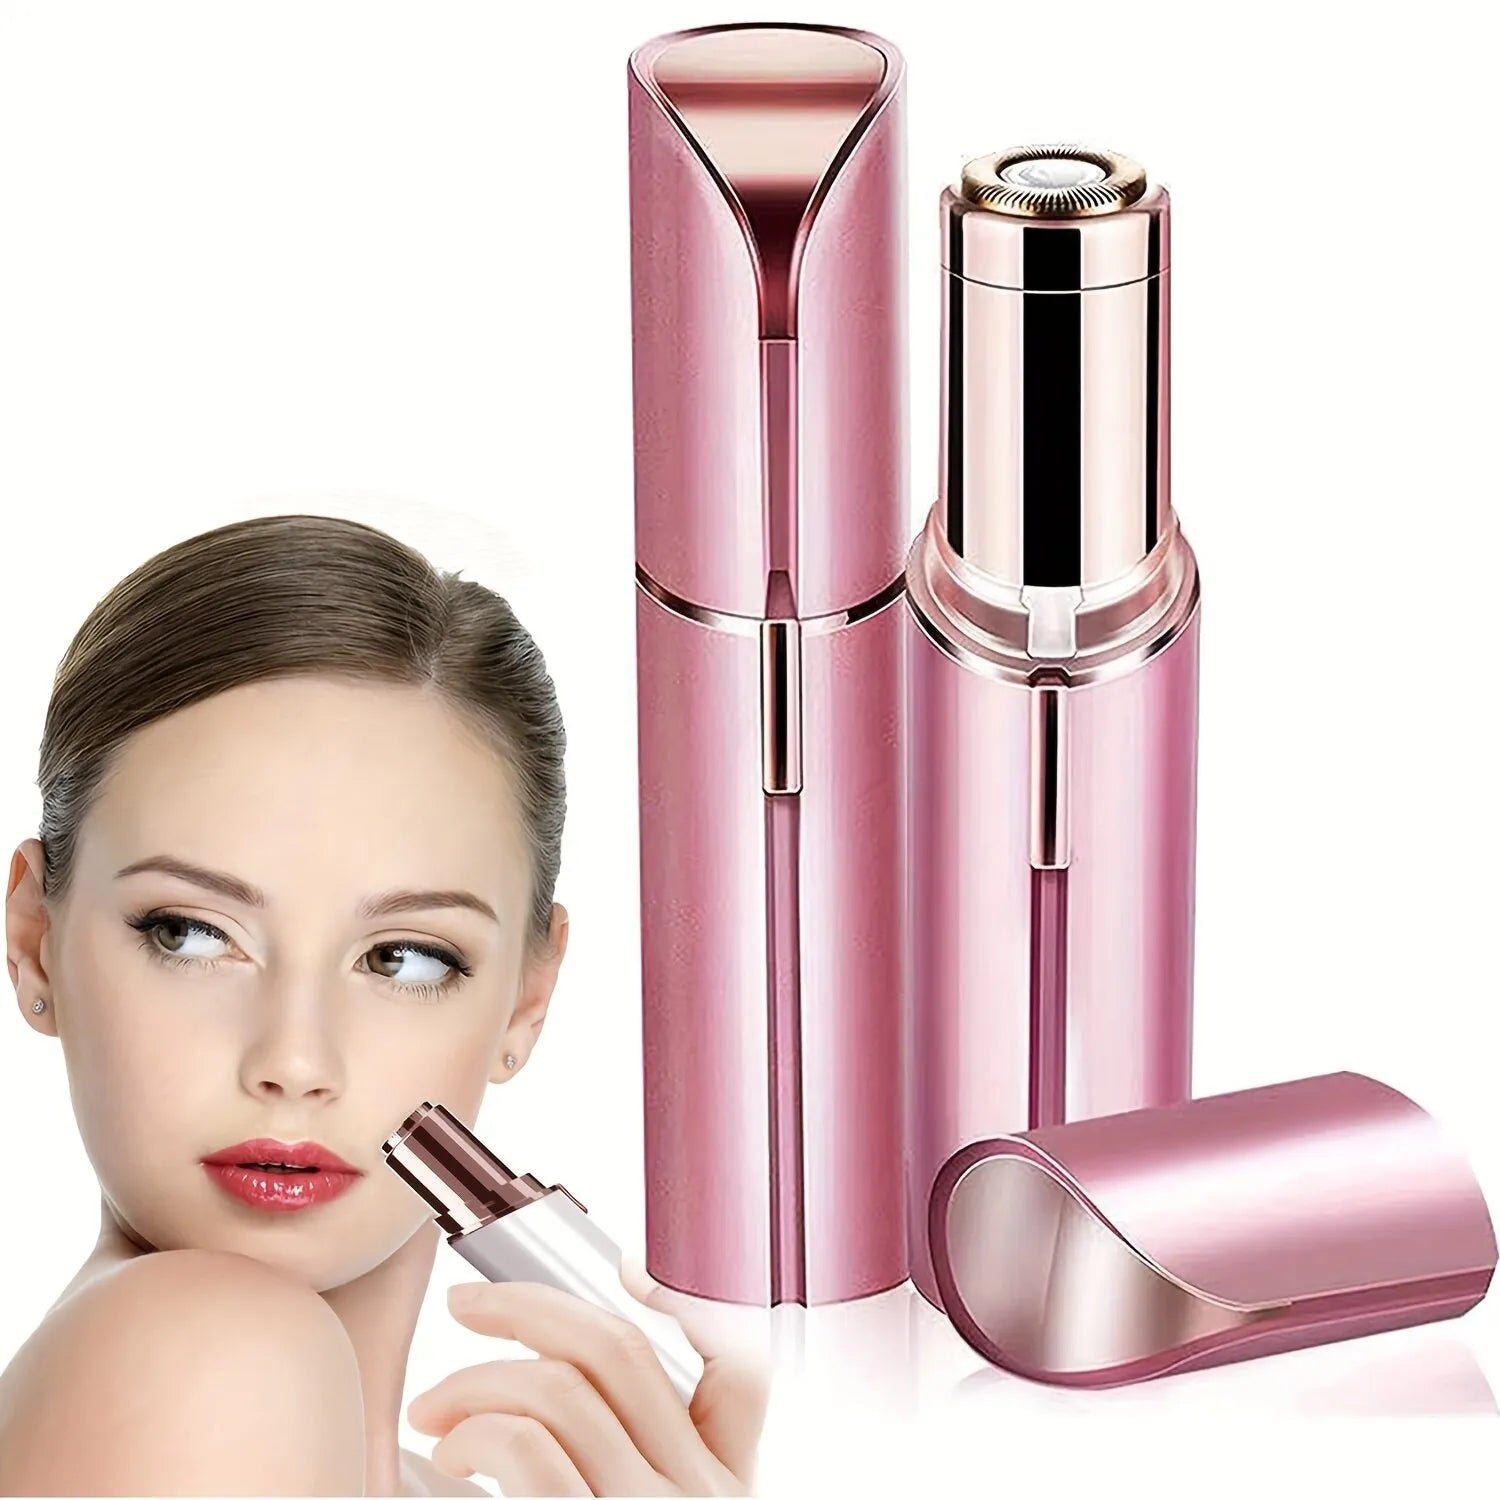 Portable Lipstick Electric Hair Remover: Painless Facial Hair Removal Solution  ourlum.com   